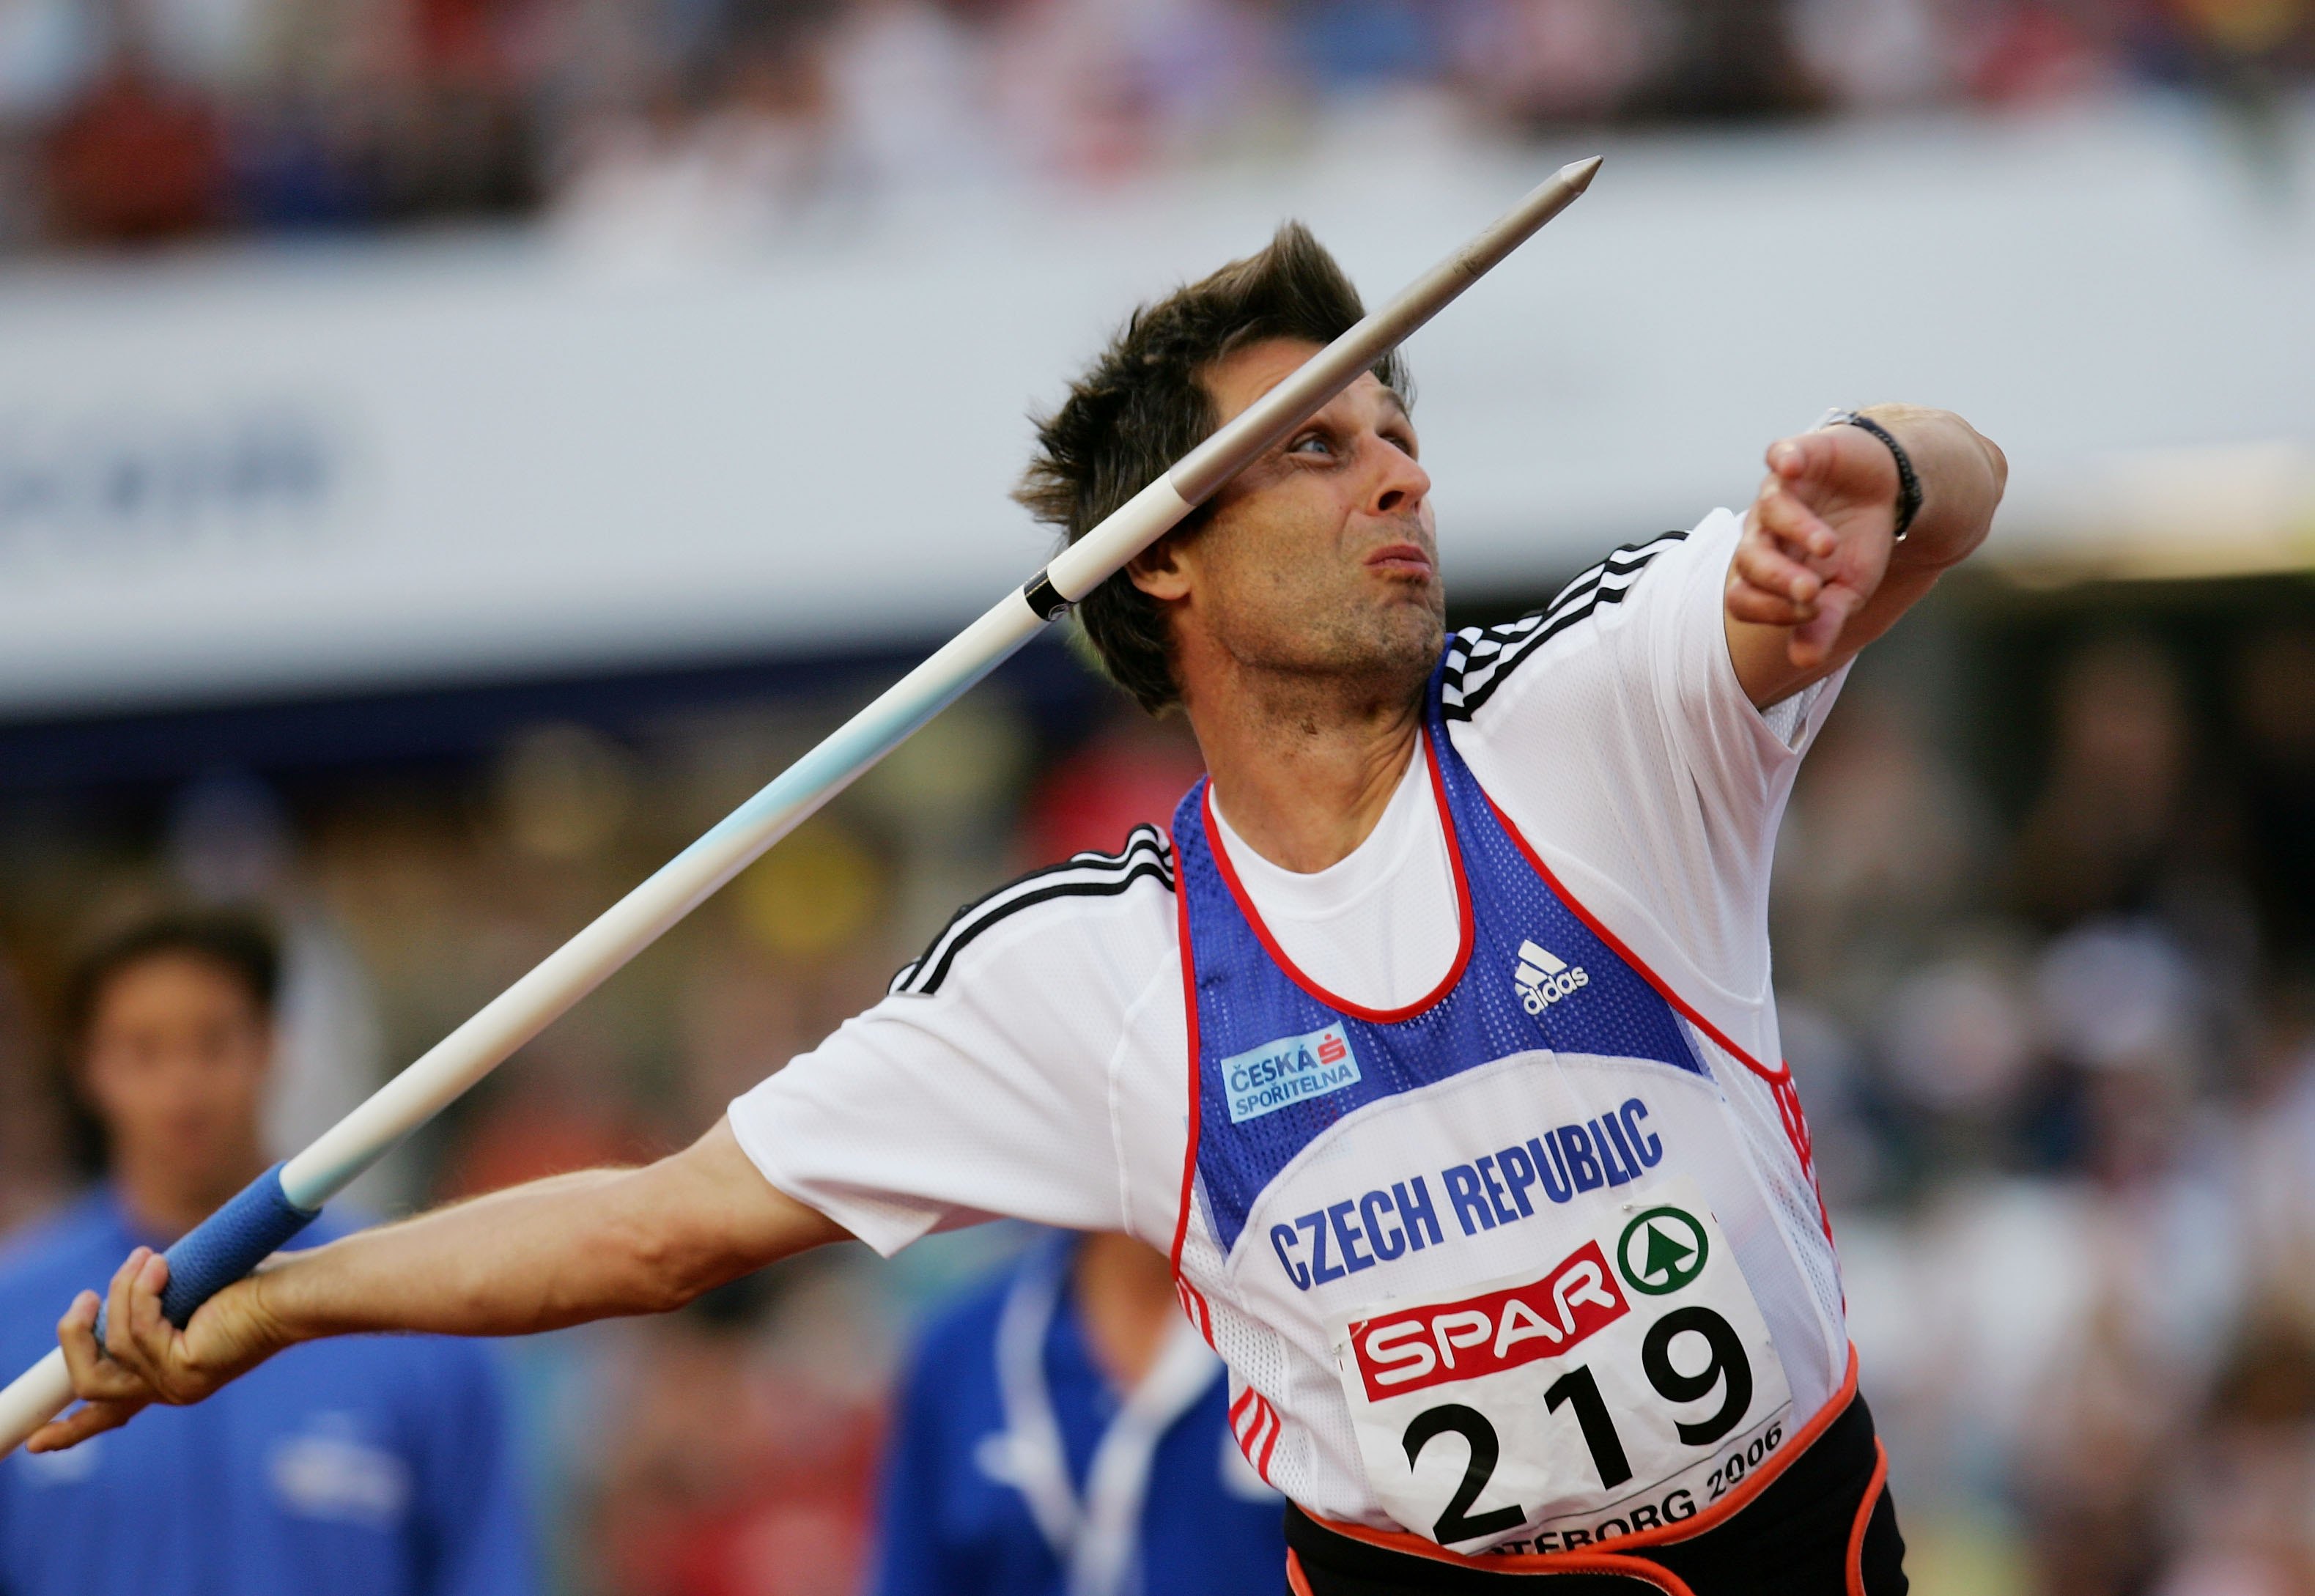 GOTHENBURG, SWEDEN - AUGUST 09:  Jan Zelezny of the Czech Republic competes during the Men's Javelin throw Final on day three of the 19th European Athletics Championships at the Ullevi Stadium on August 9, 2006 in Gothenburg, Sweden.  (Photo by Michael St